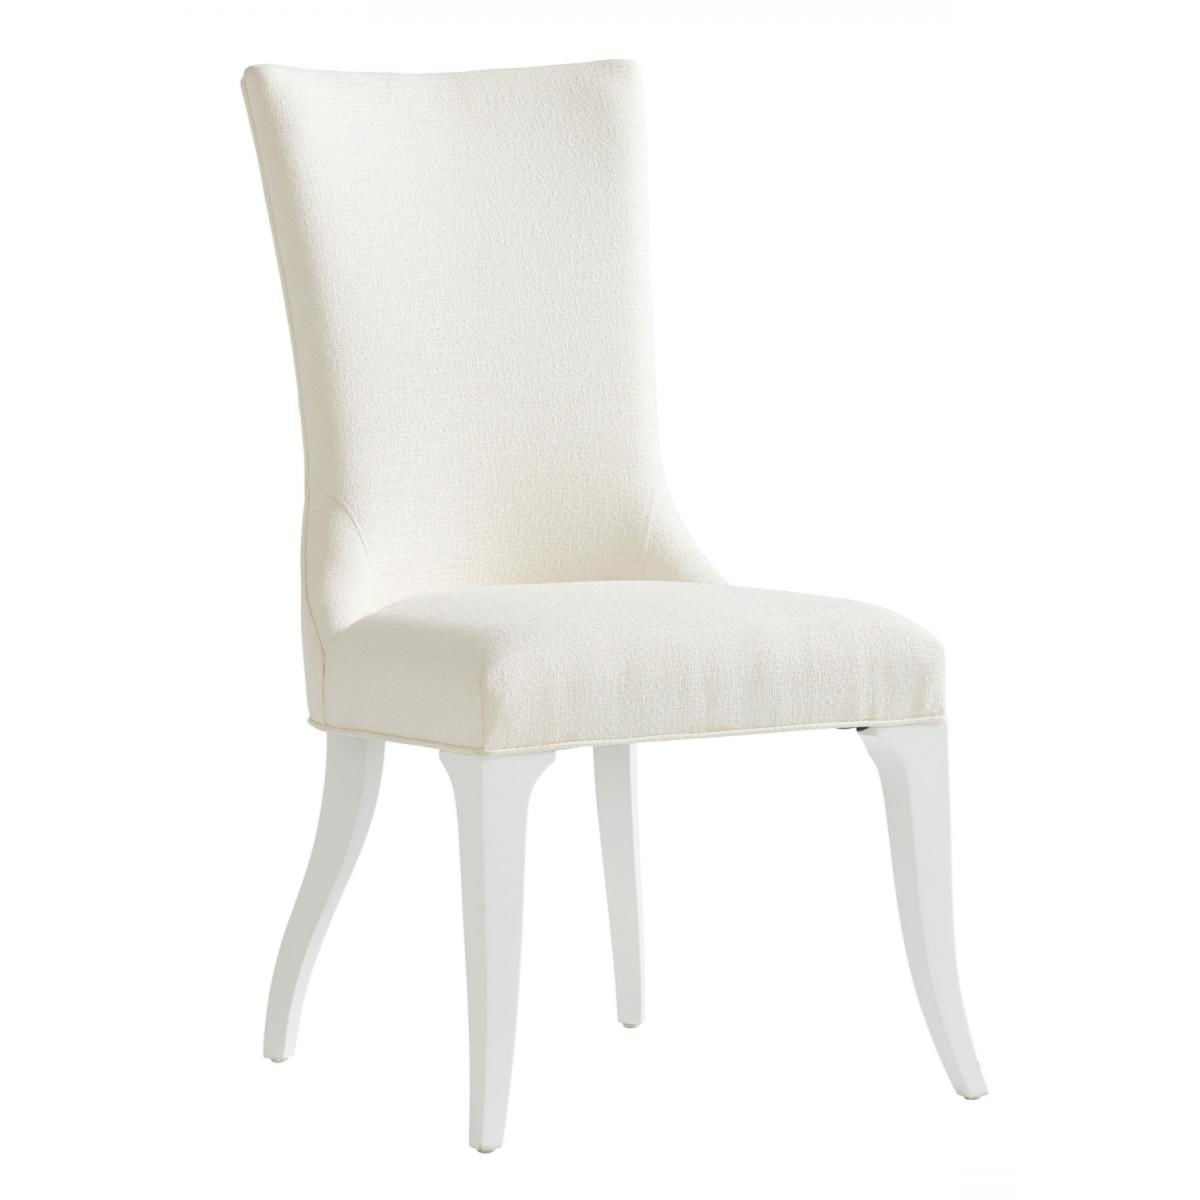 Picture of GENEVA UPHOLSTERED SIDE CHAIR